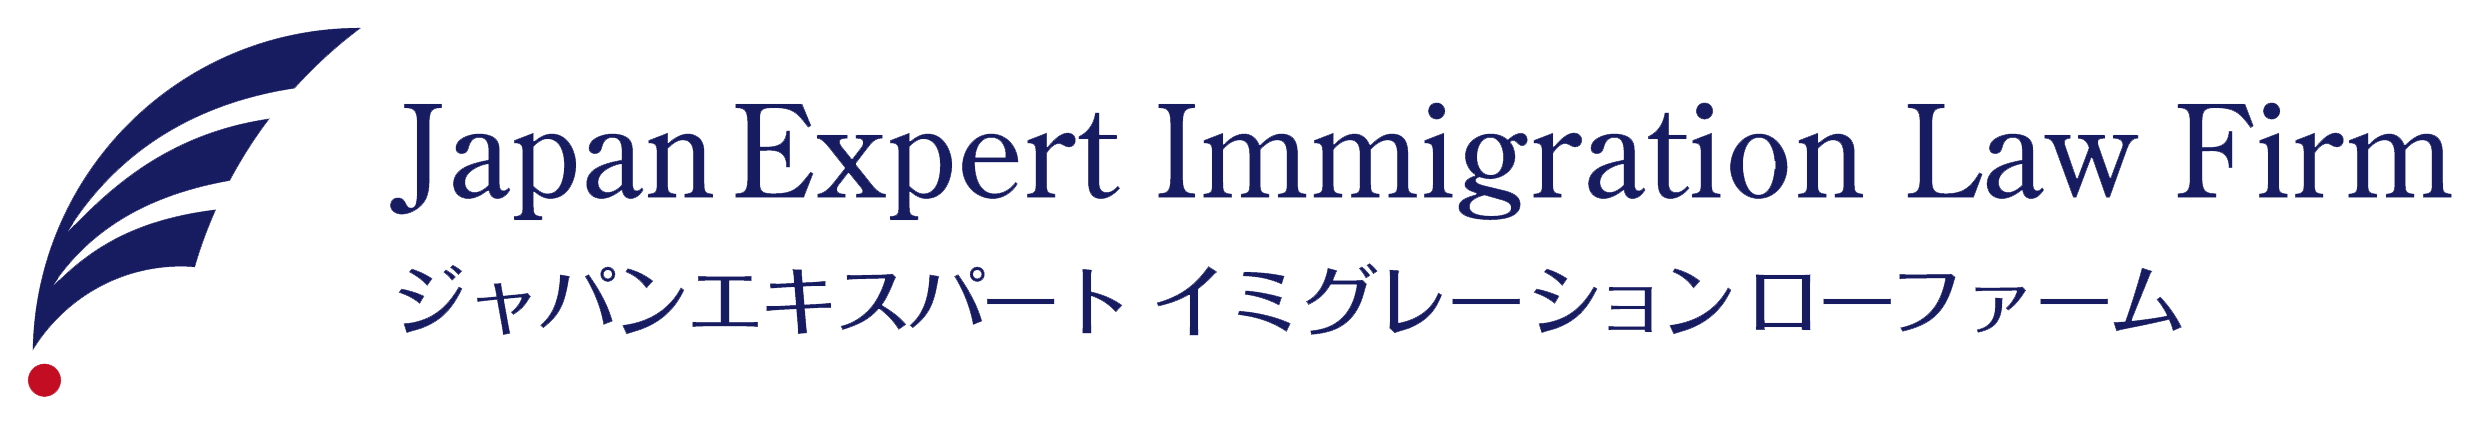 Firm Overview｜行政書士法人Japan Expert Immigration Law Firm